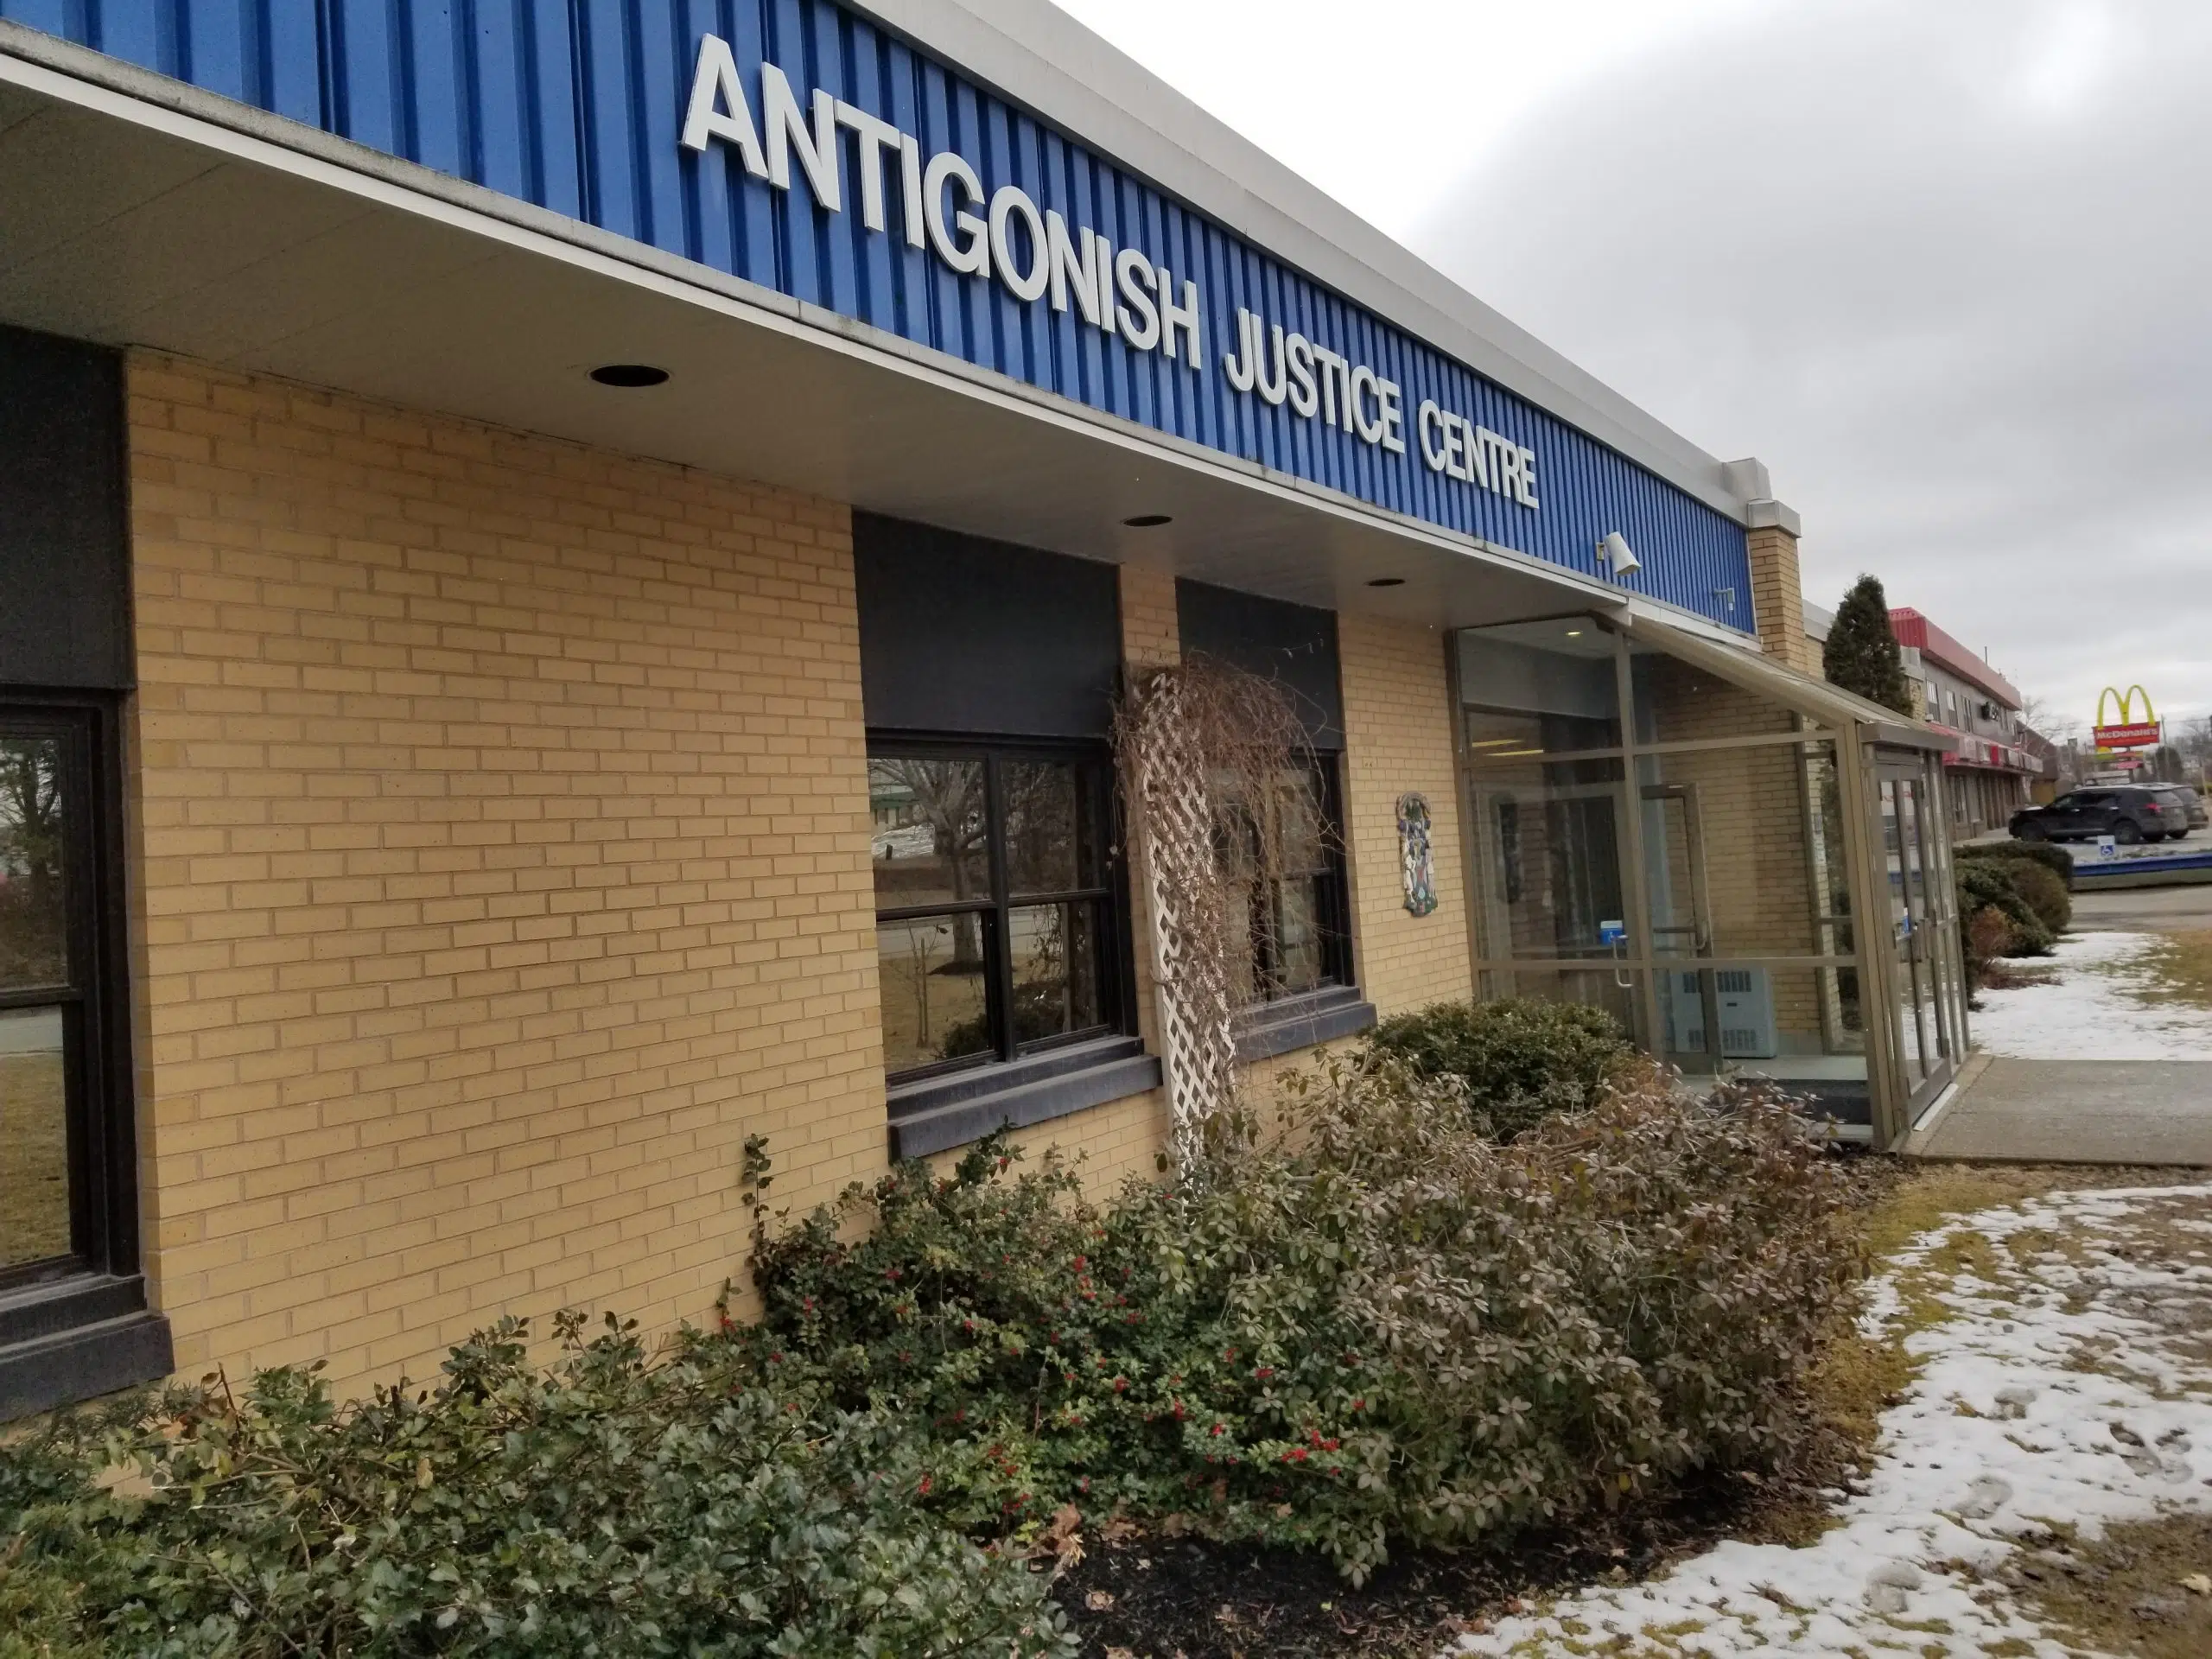 Man charged following reported sexual assault in Antigonish expected in court